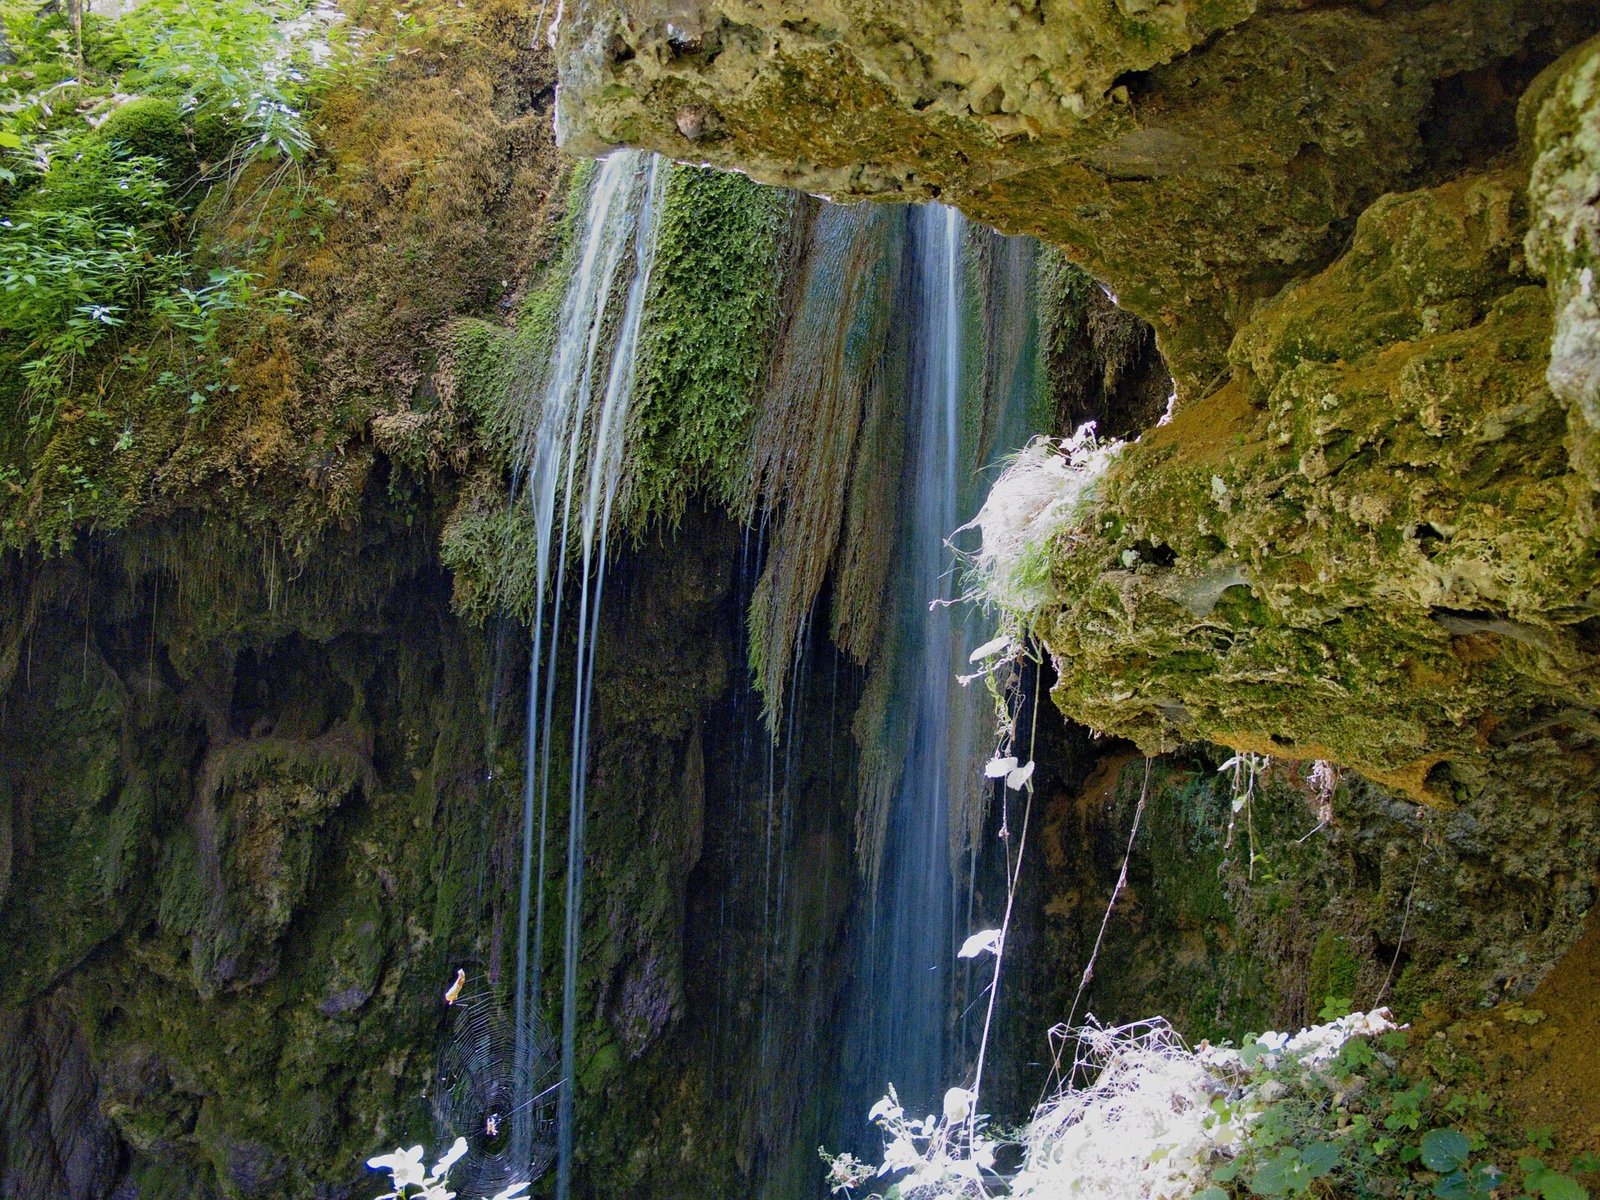 Panjica Canyon and Water Cave